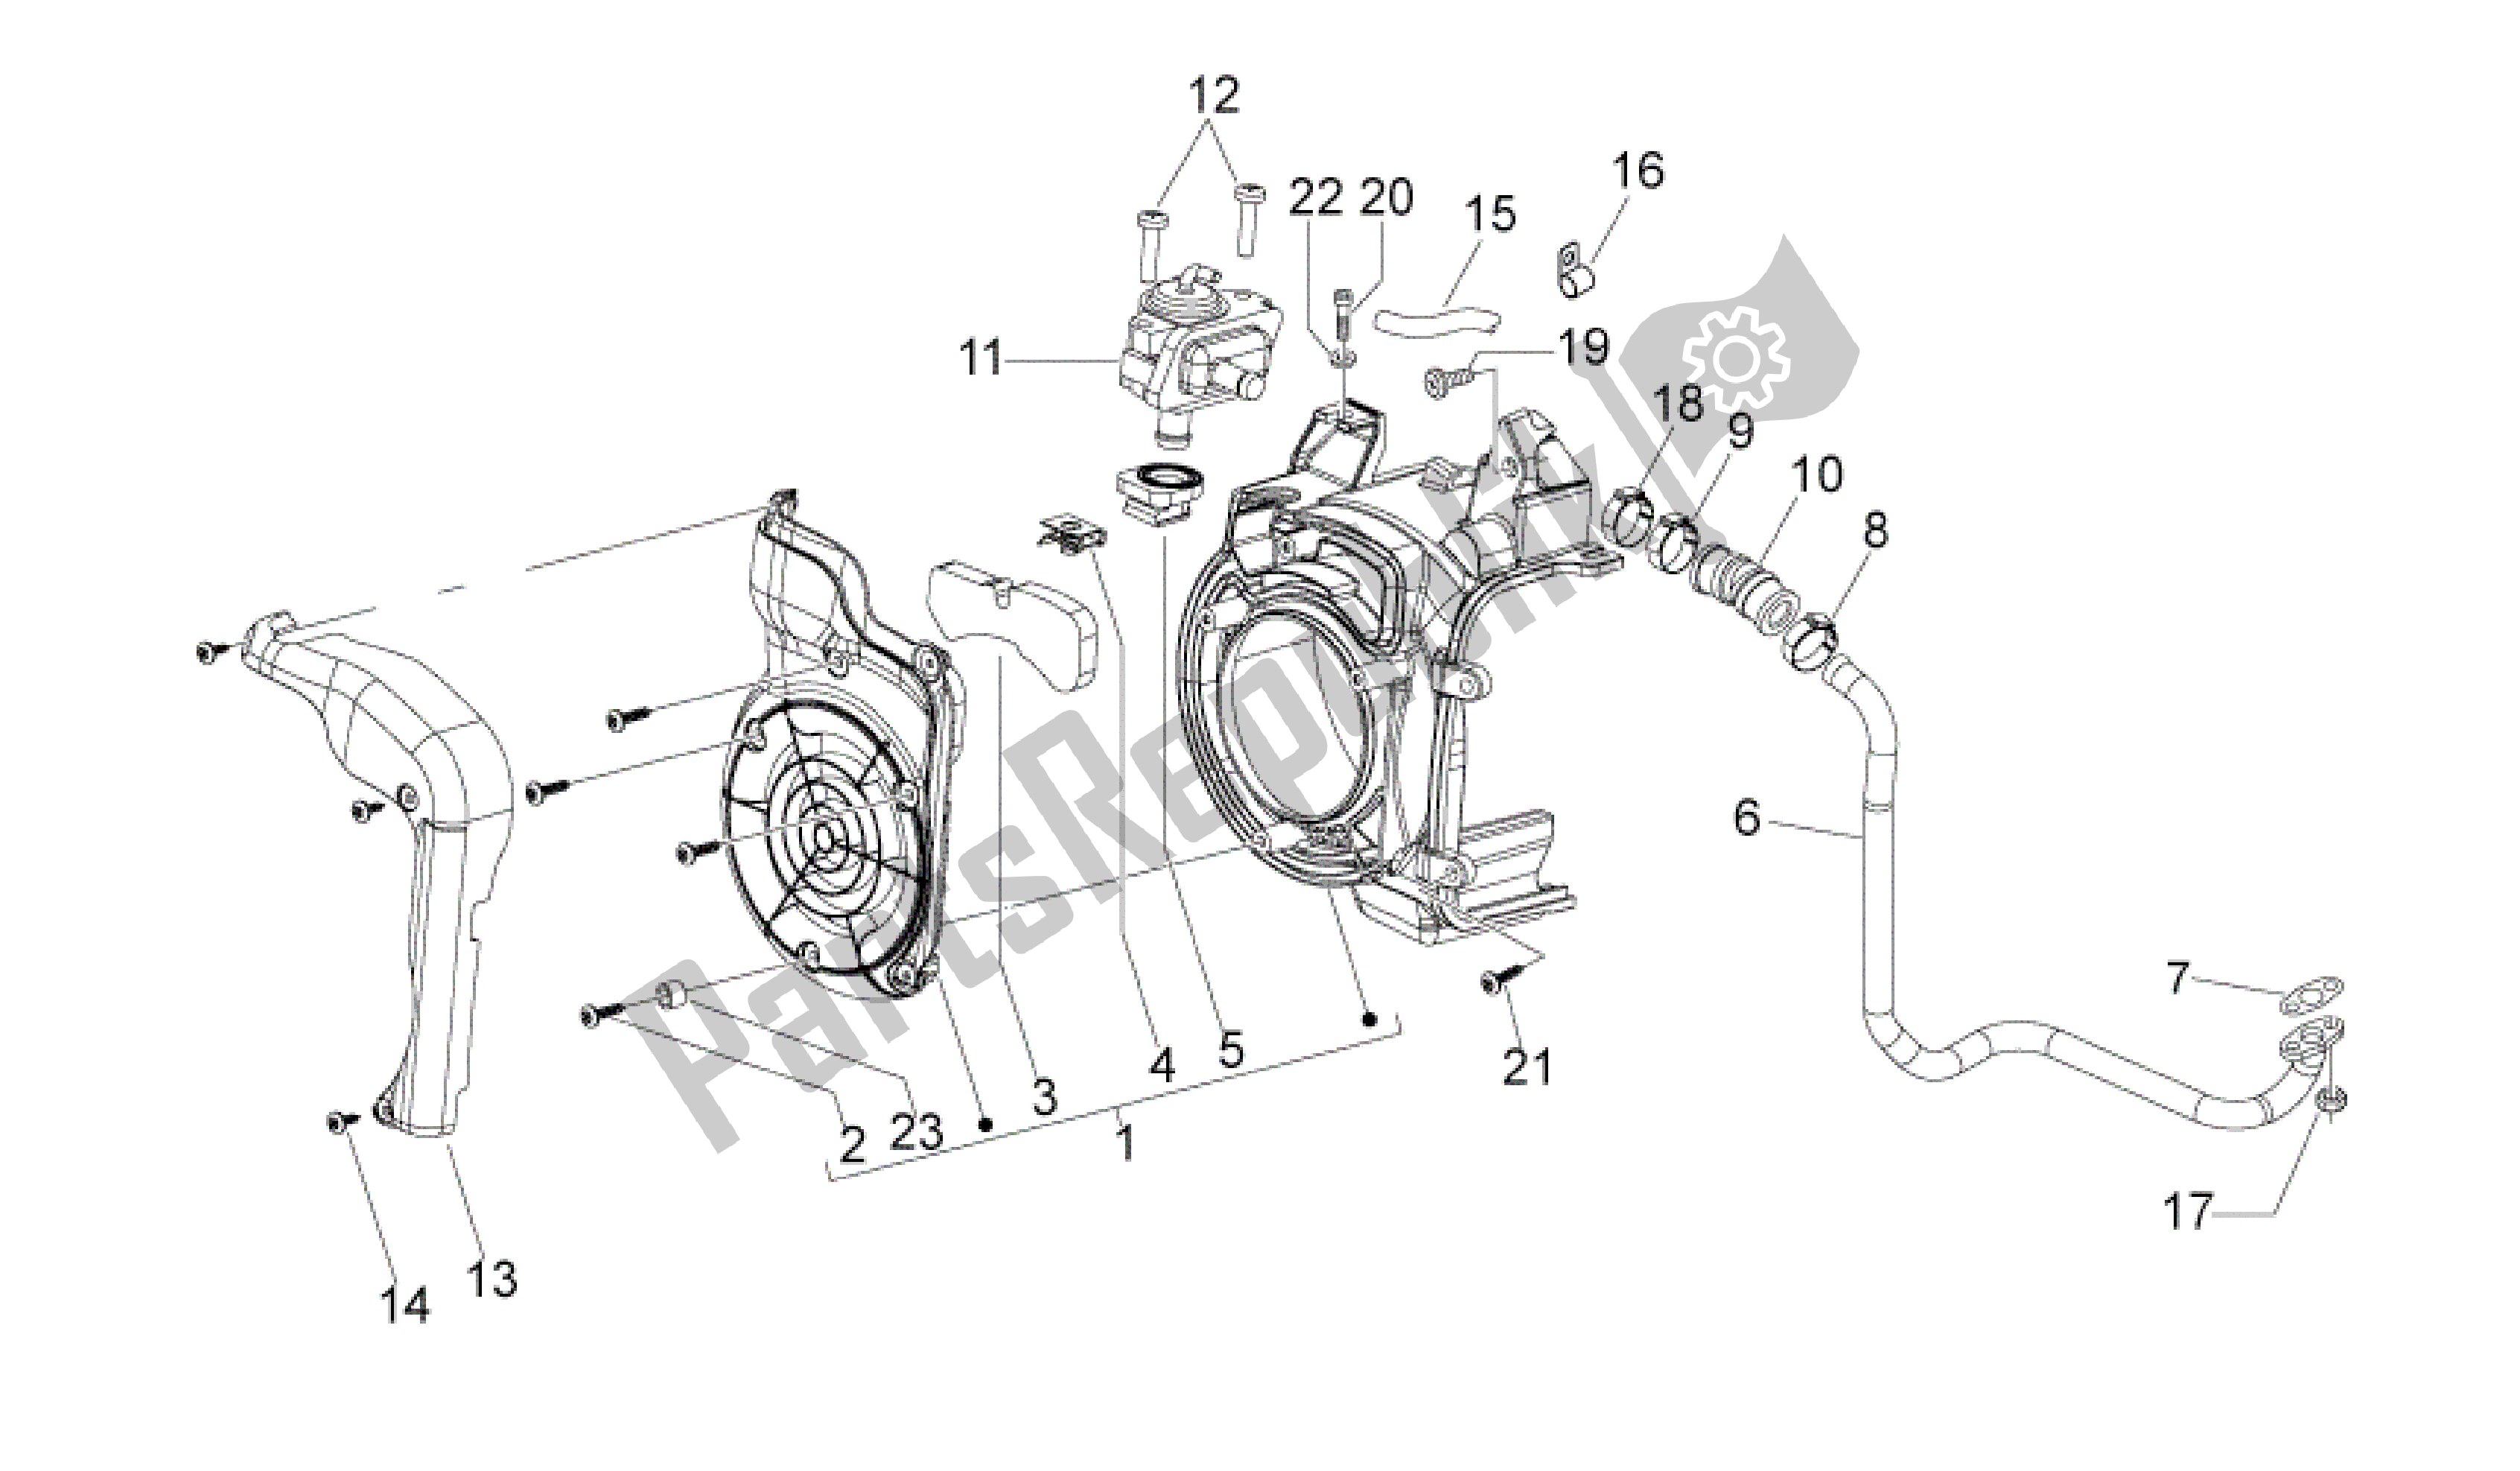 All parts for the Secondary Air of the Aprilia Sport City 125 2008 - 2010